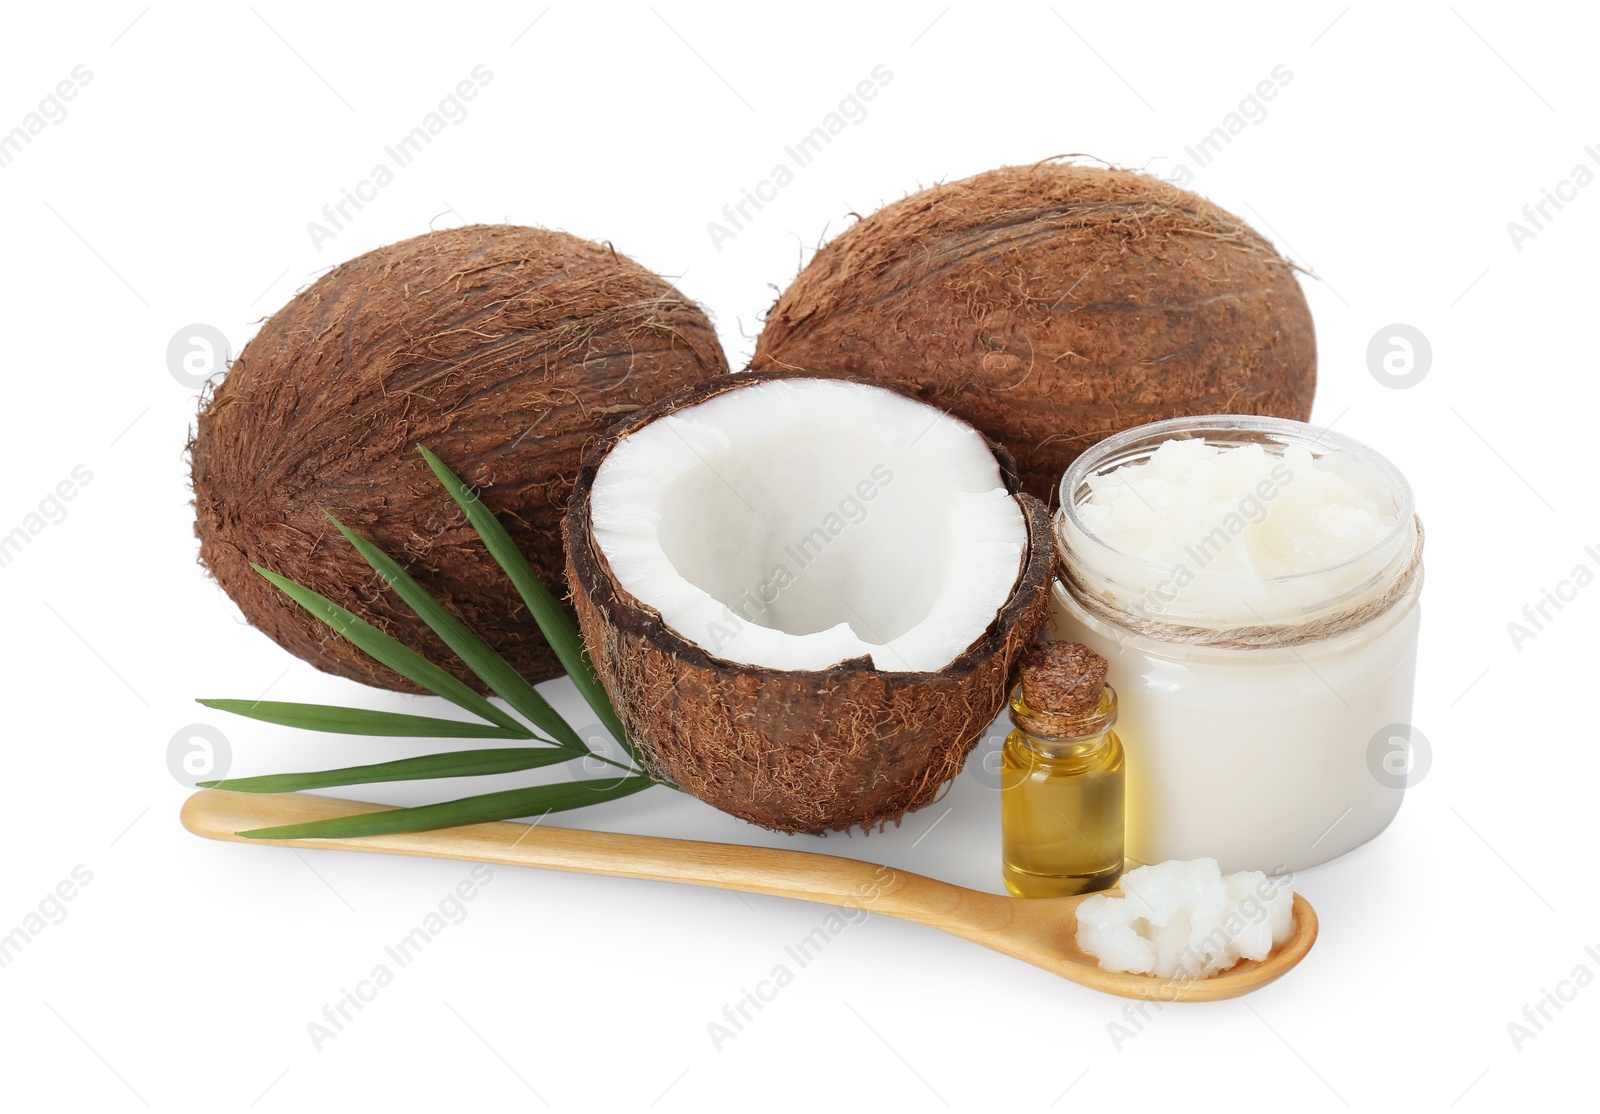 Photo of Organic coconut cooking oil, fresh fruits, wooden spoon and green leaf isolated on white